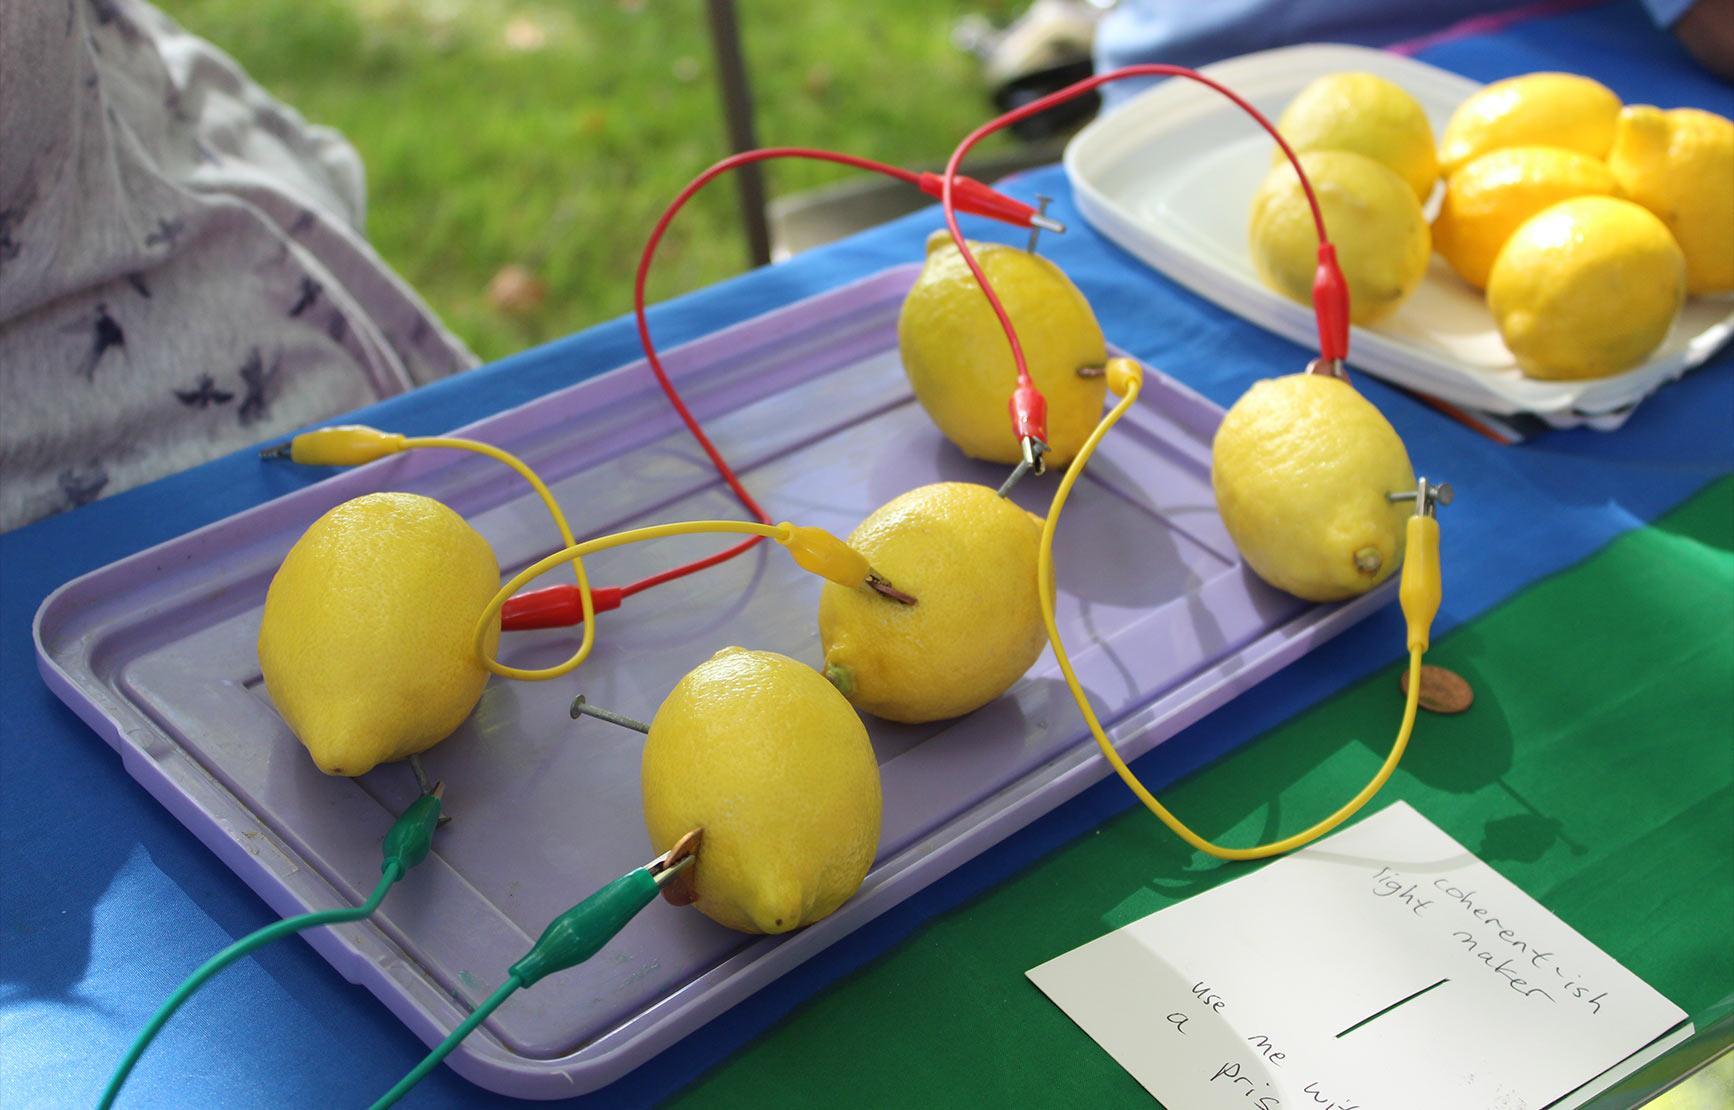 Lemons wired up in science experiment at science club booth table.